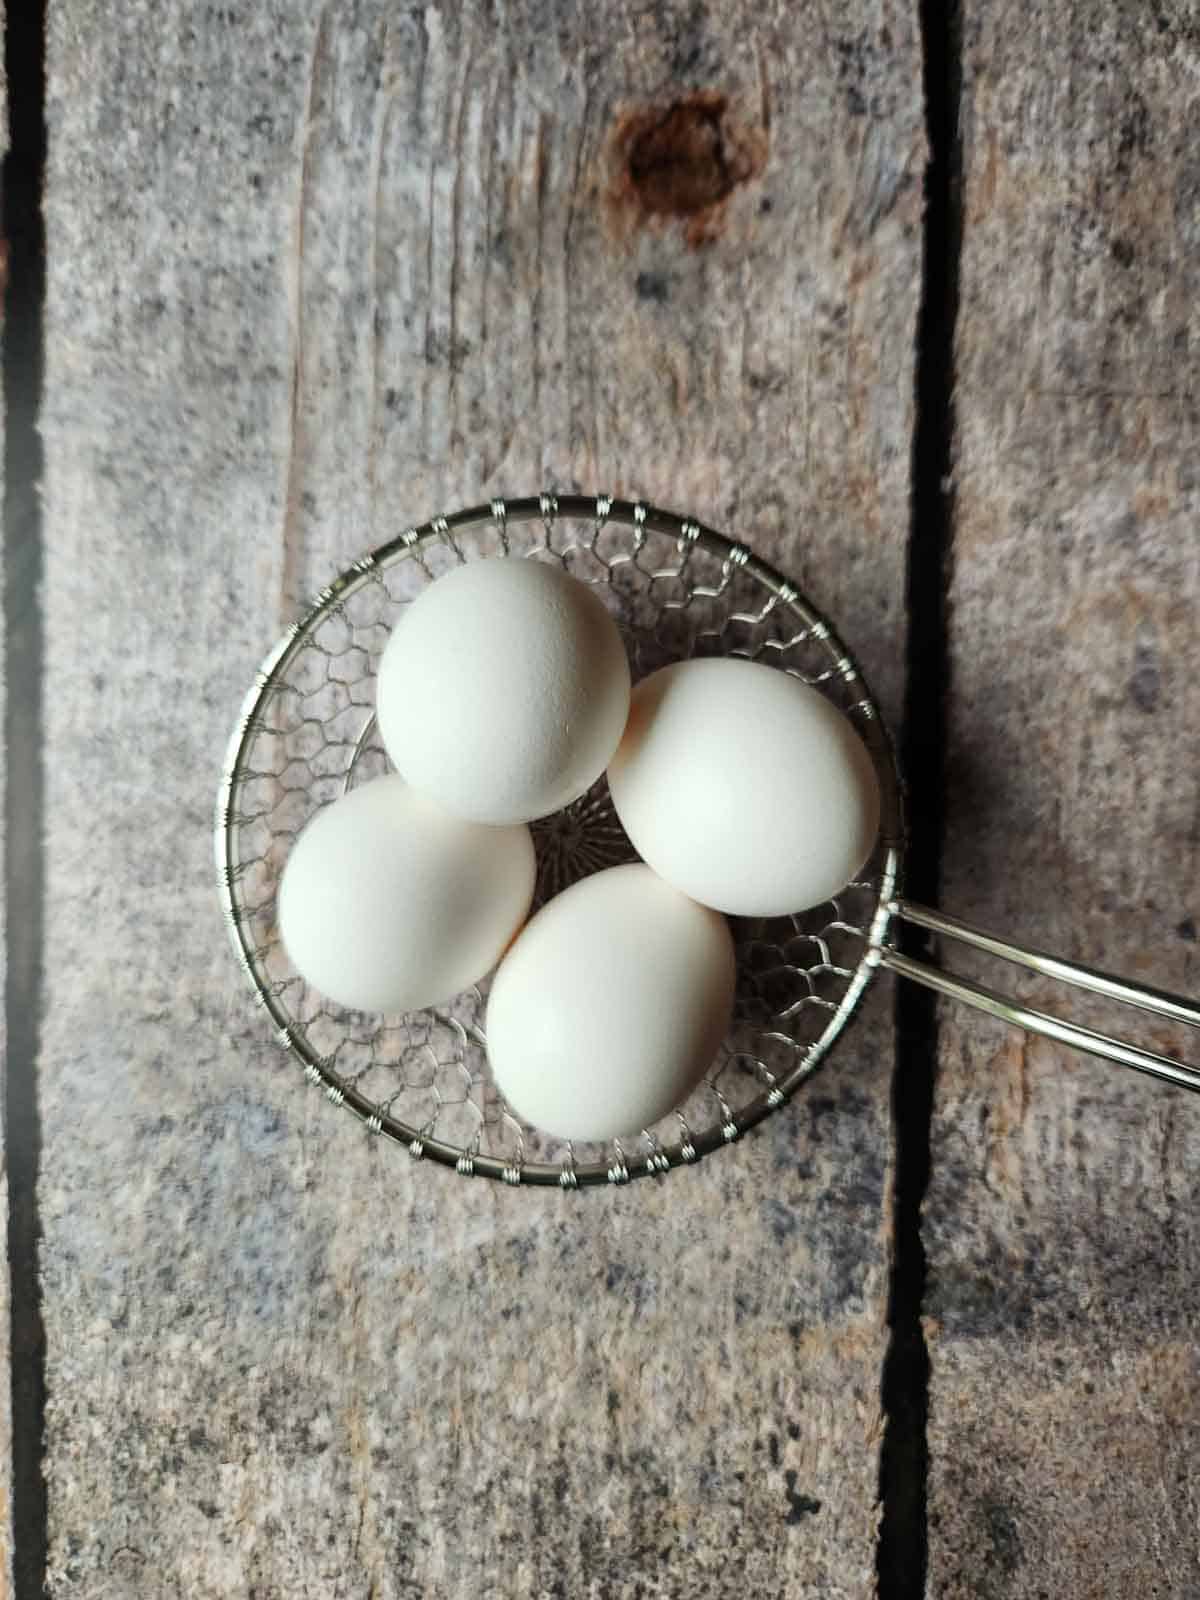 Four eggs in a wire strainer.